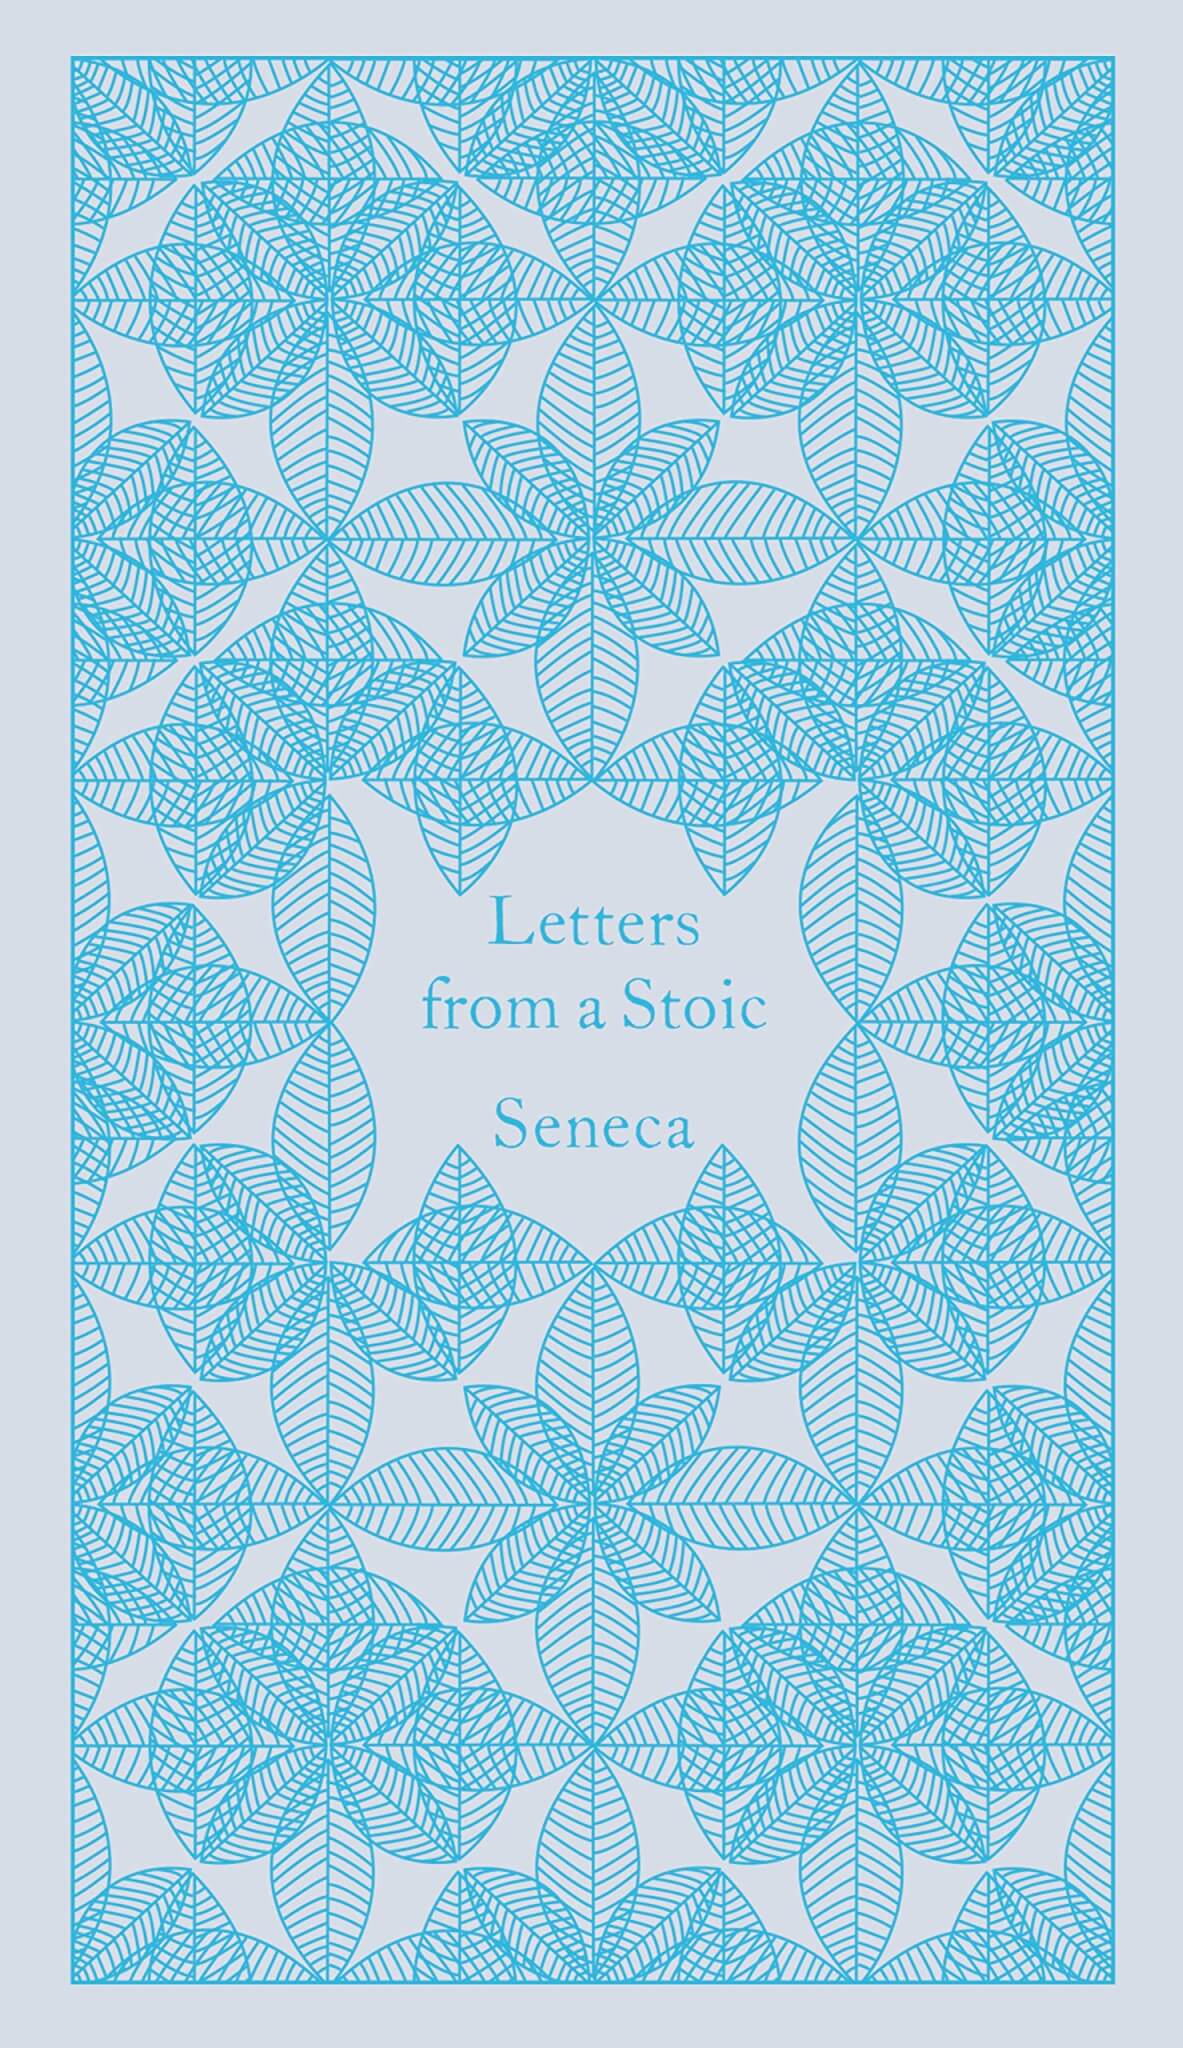 "Letters from a Stoic" by Seneca